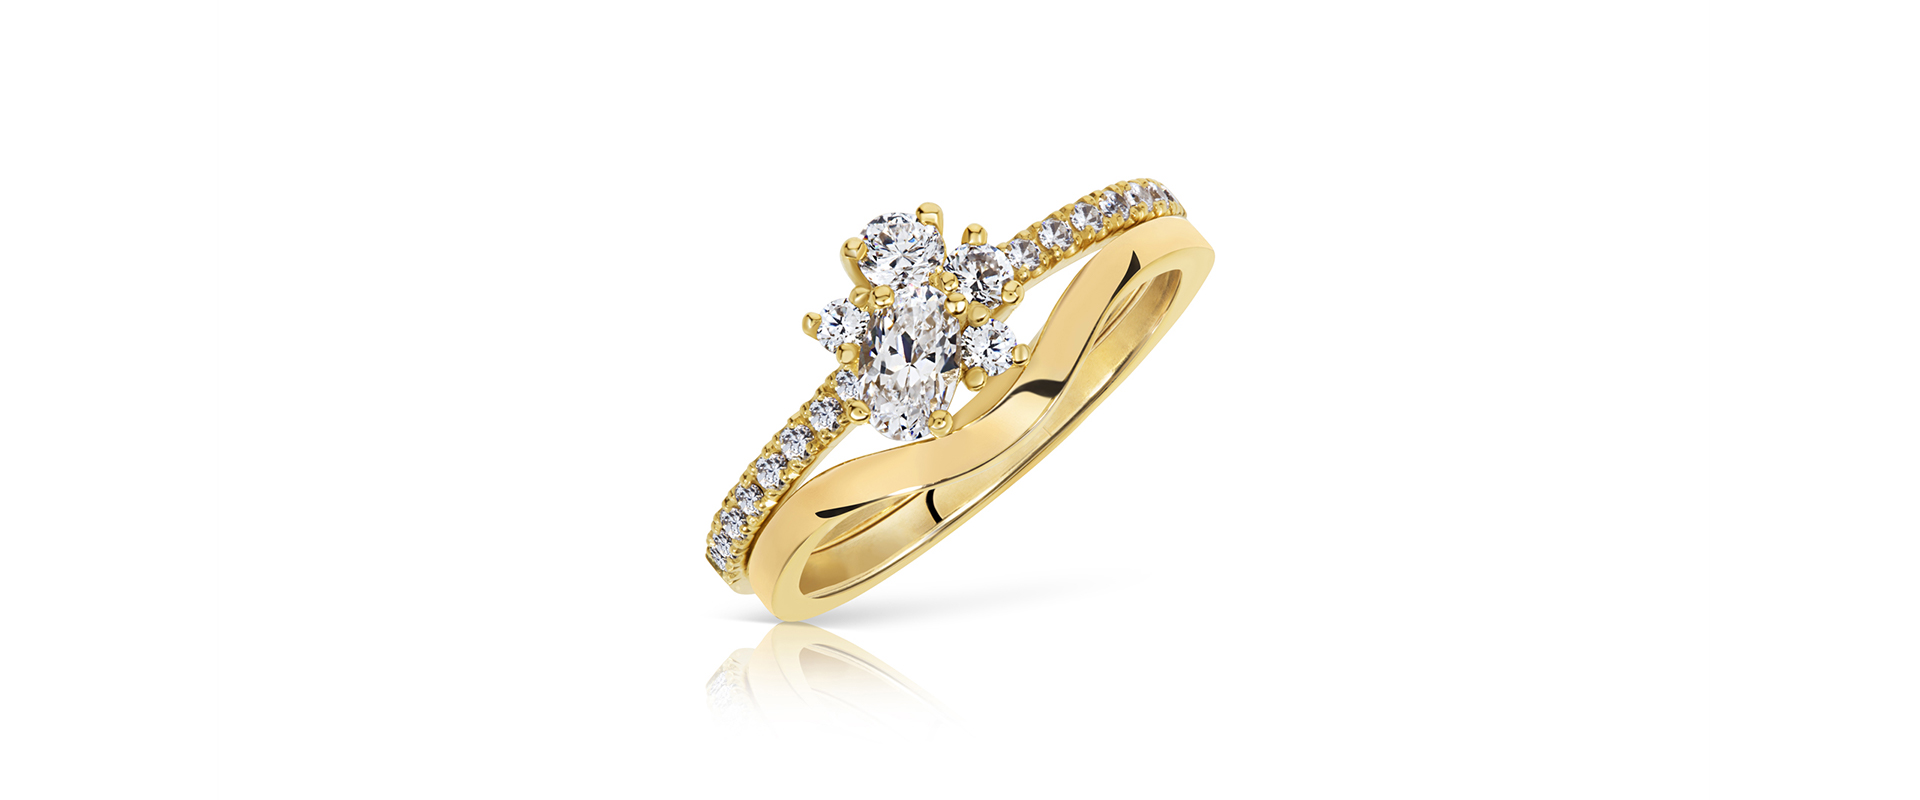 Astral cluster engagement ring 4 with fitted wedding band - yellow gold